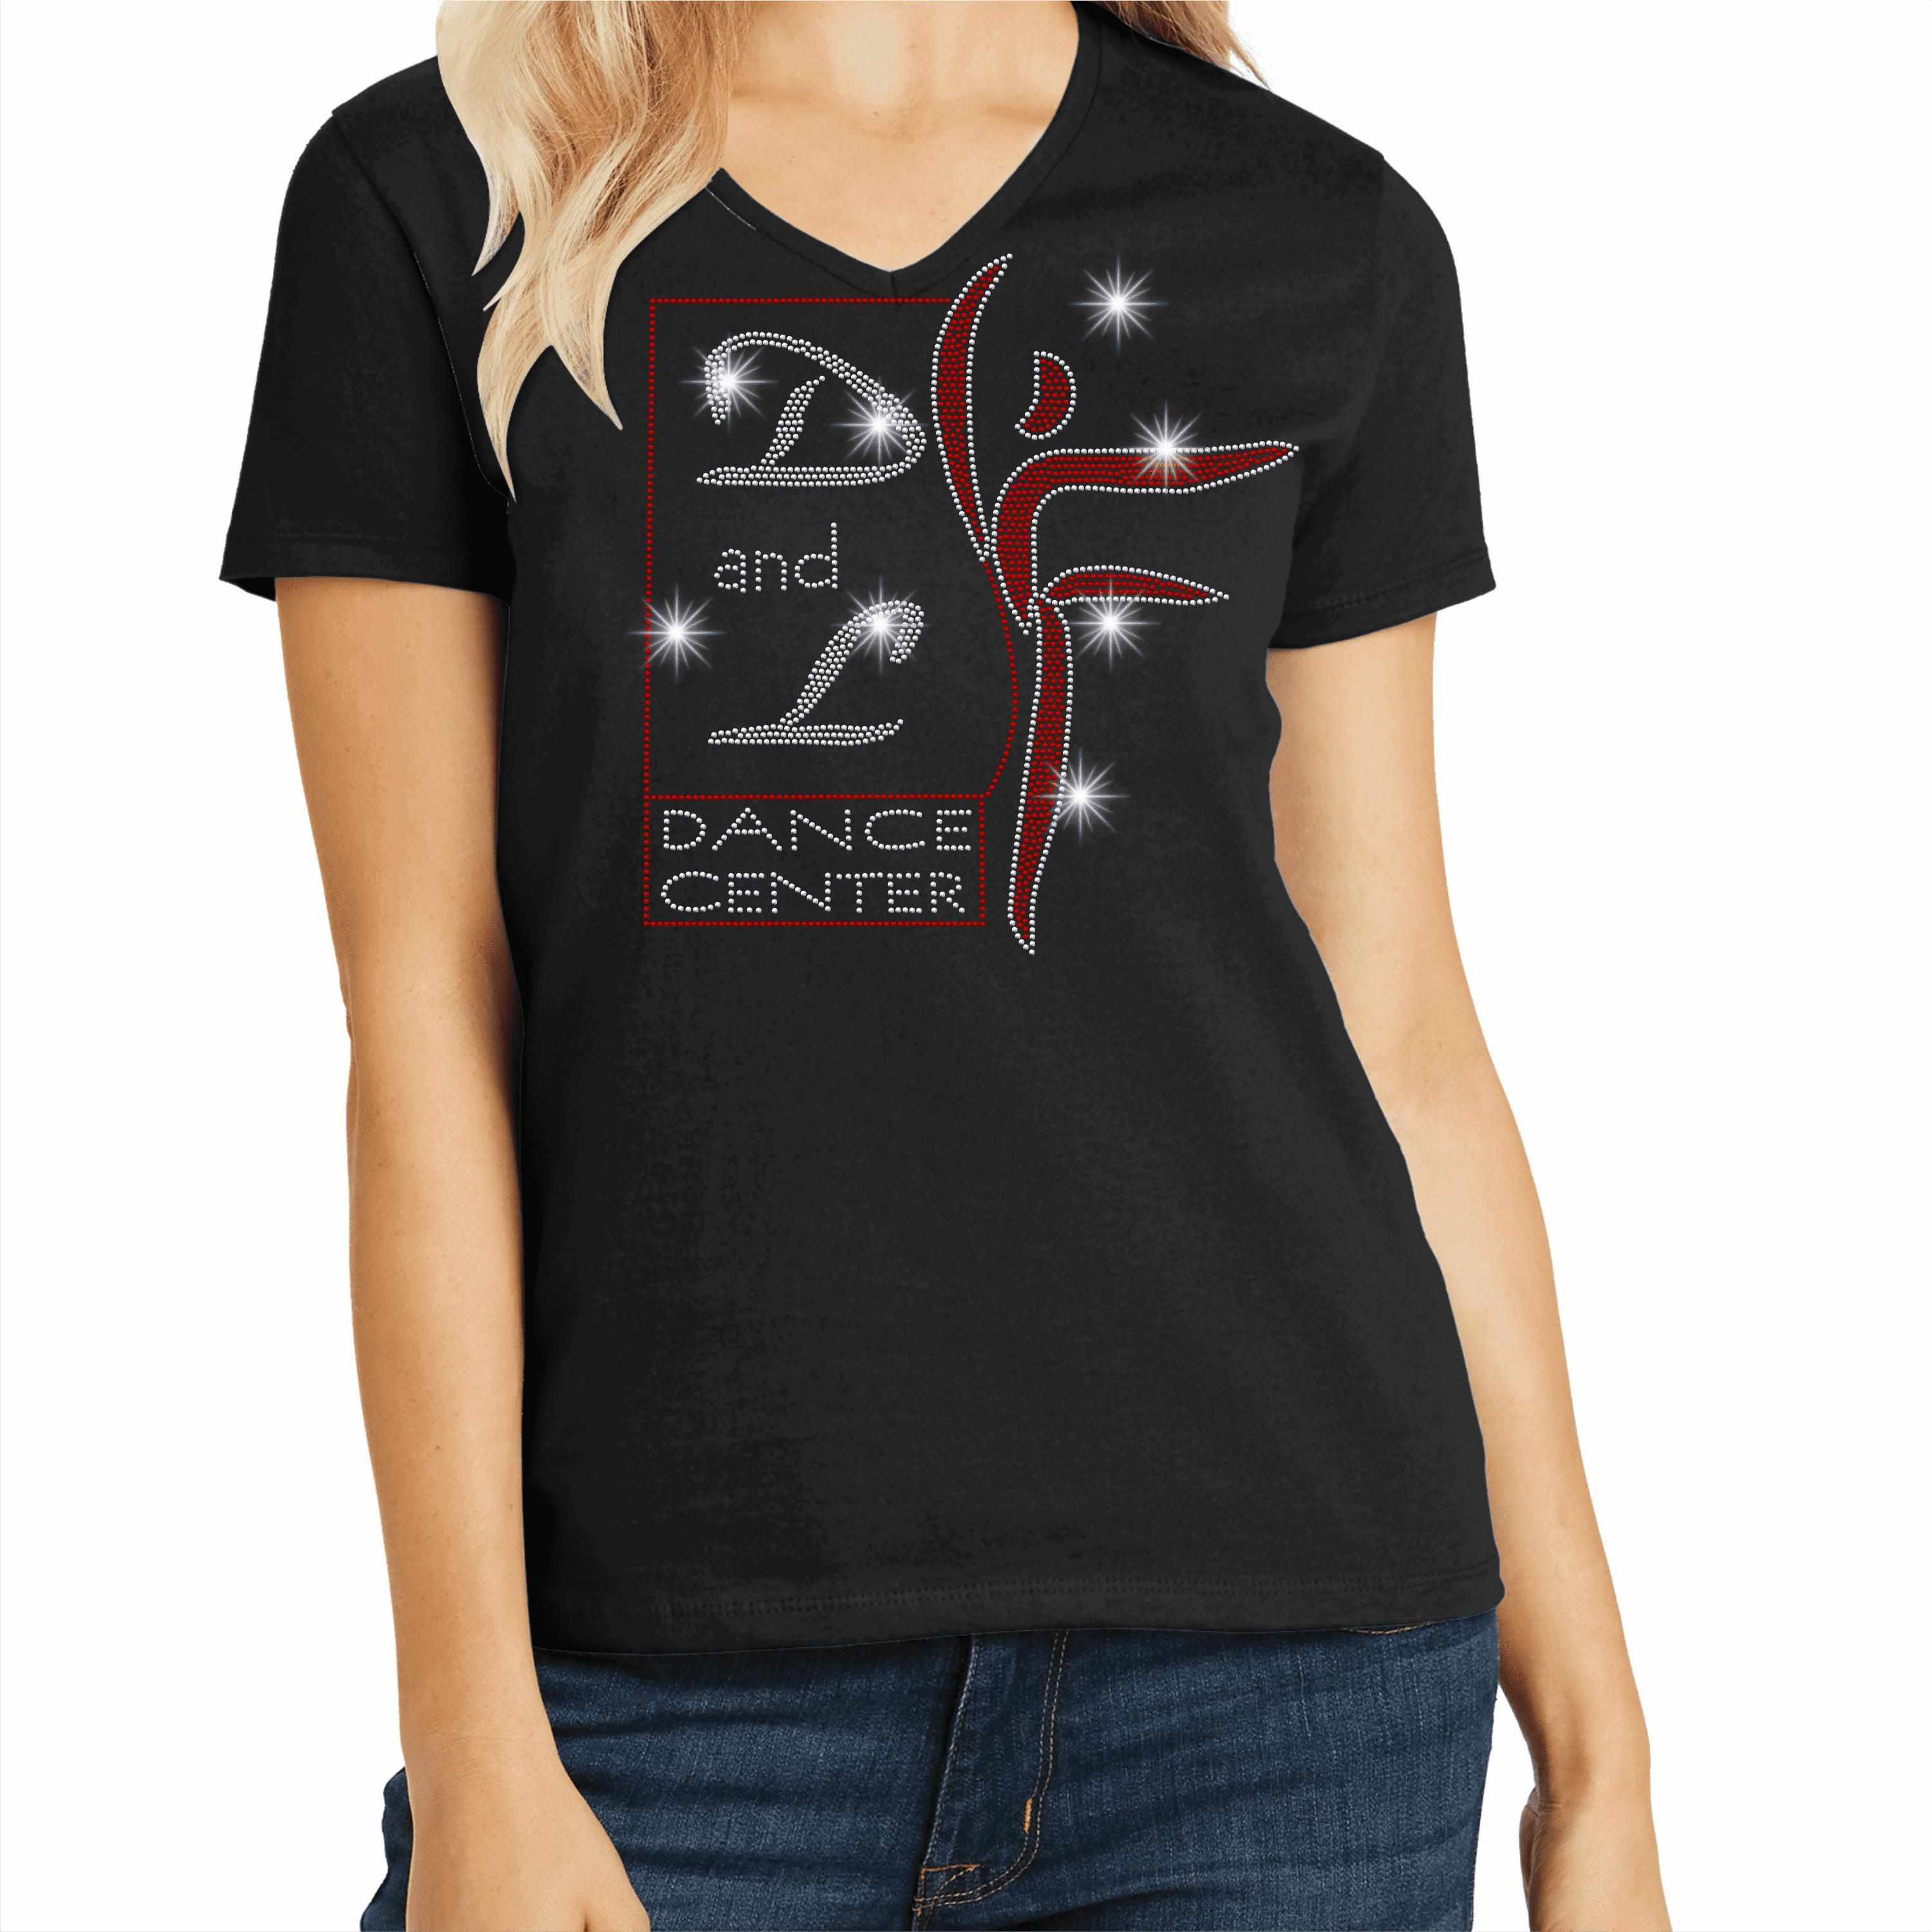 D and L Dance Center Ladies Short Sleeve V-Neck-Black Ladies Short Long Sleeve V-neck Becky's Boutique Extra Small 